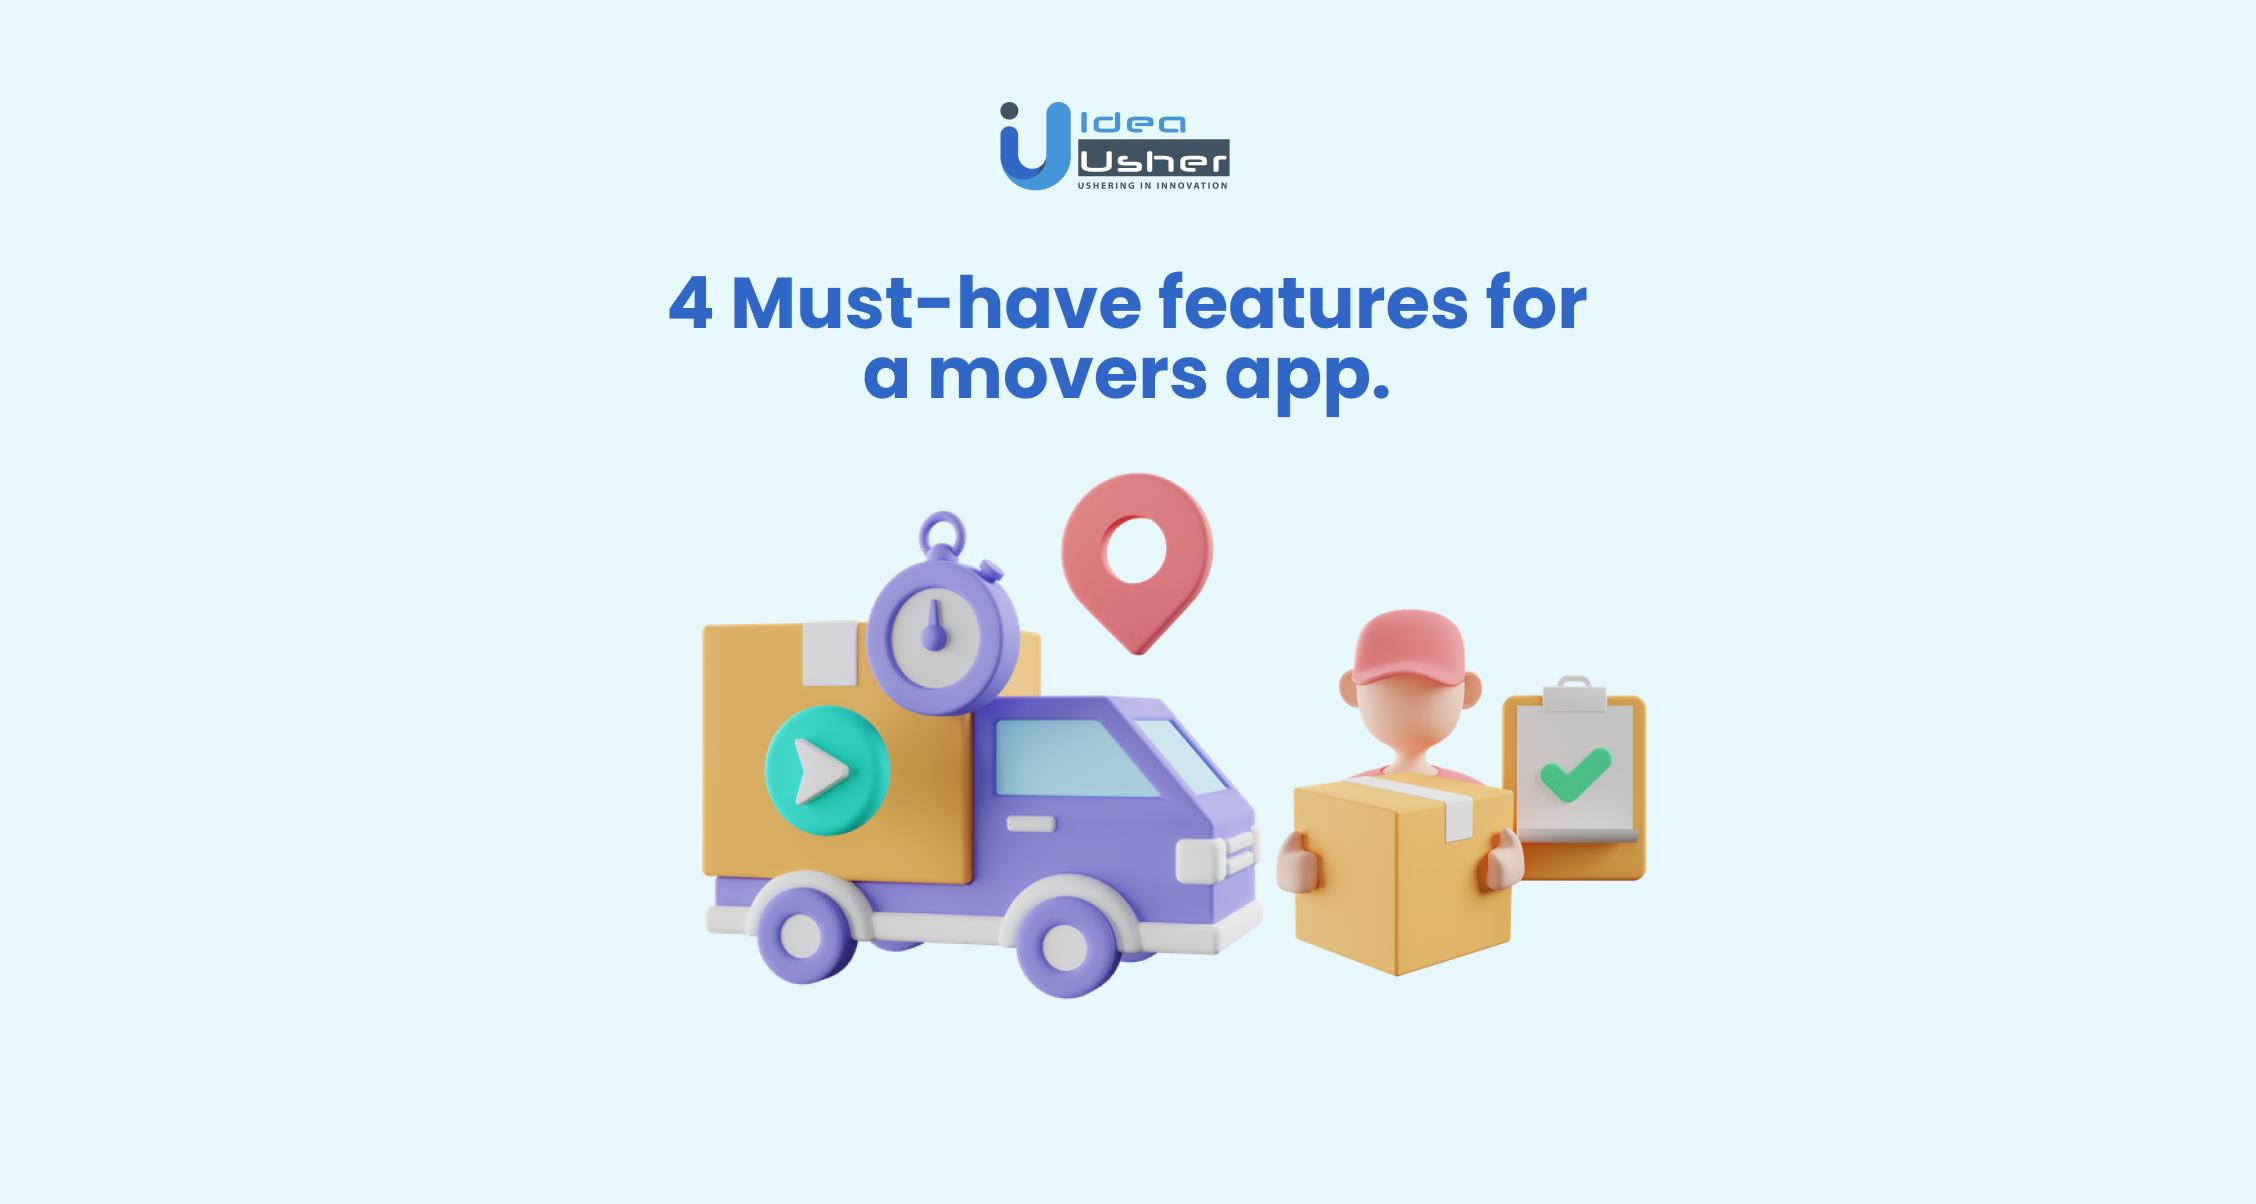 Movers and packers app must have features